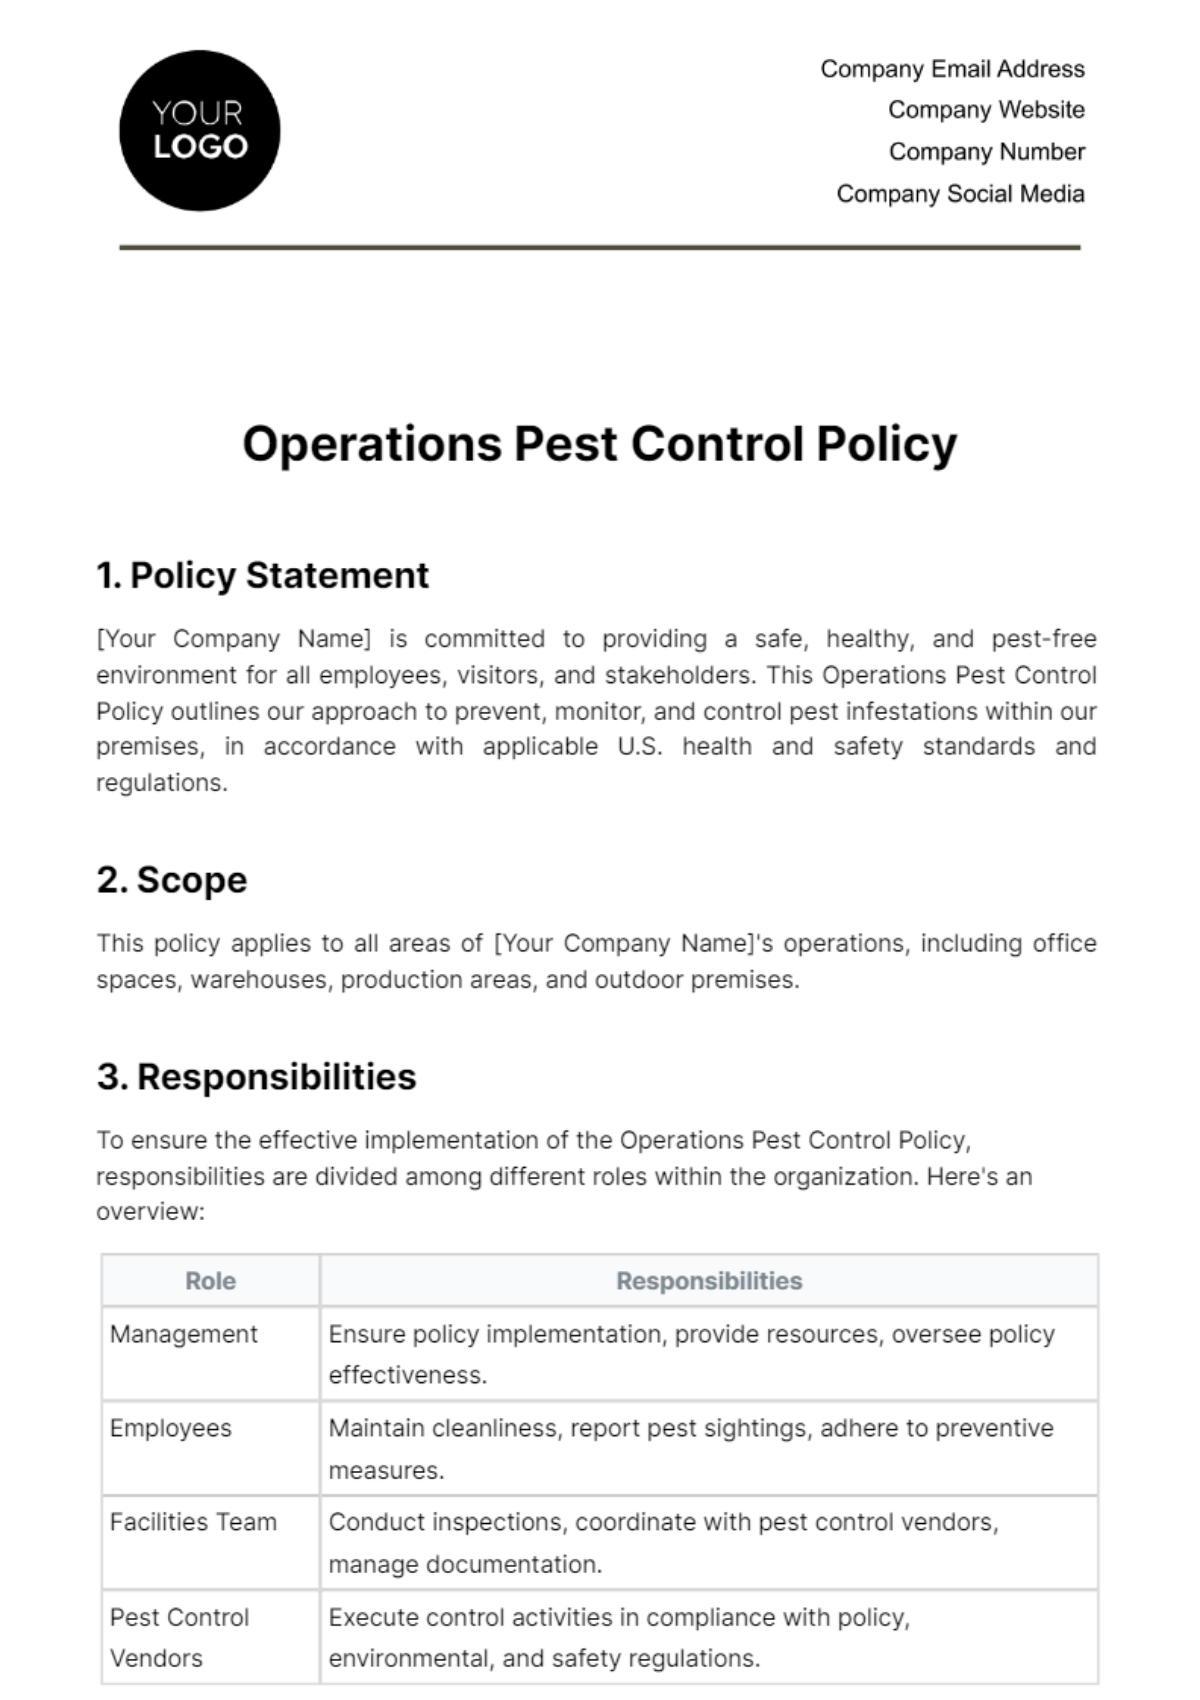 Operations Pest Control Policy Template